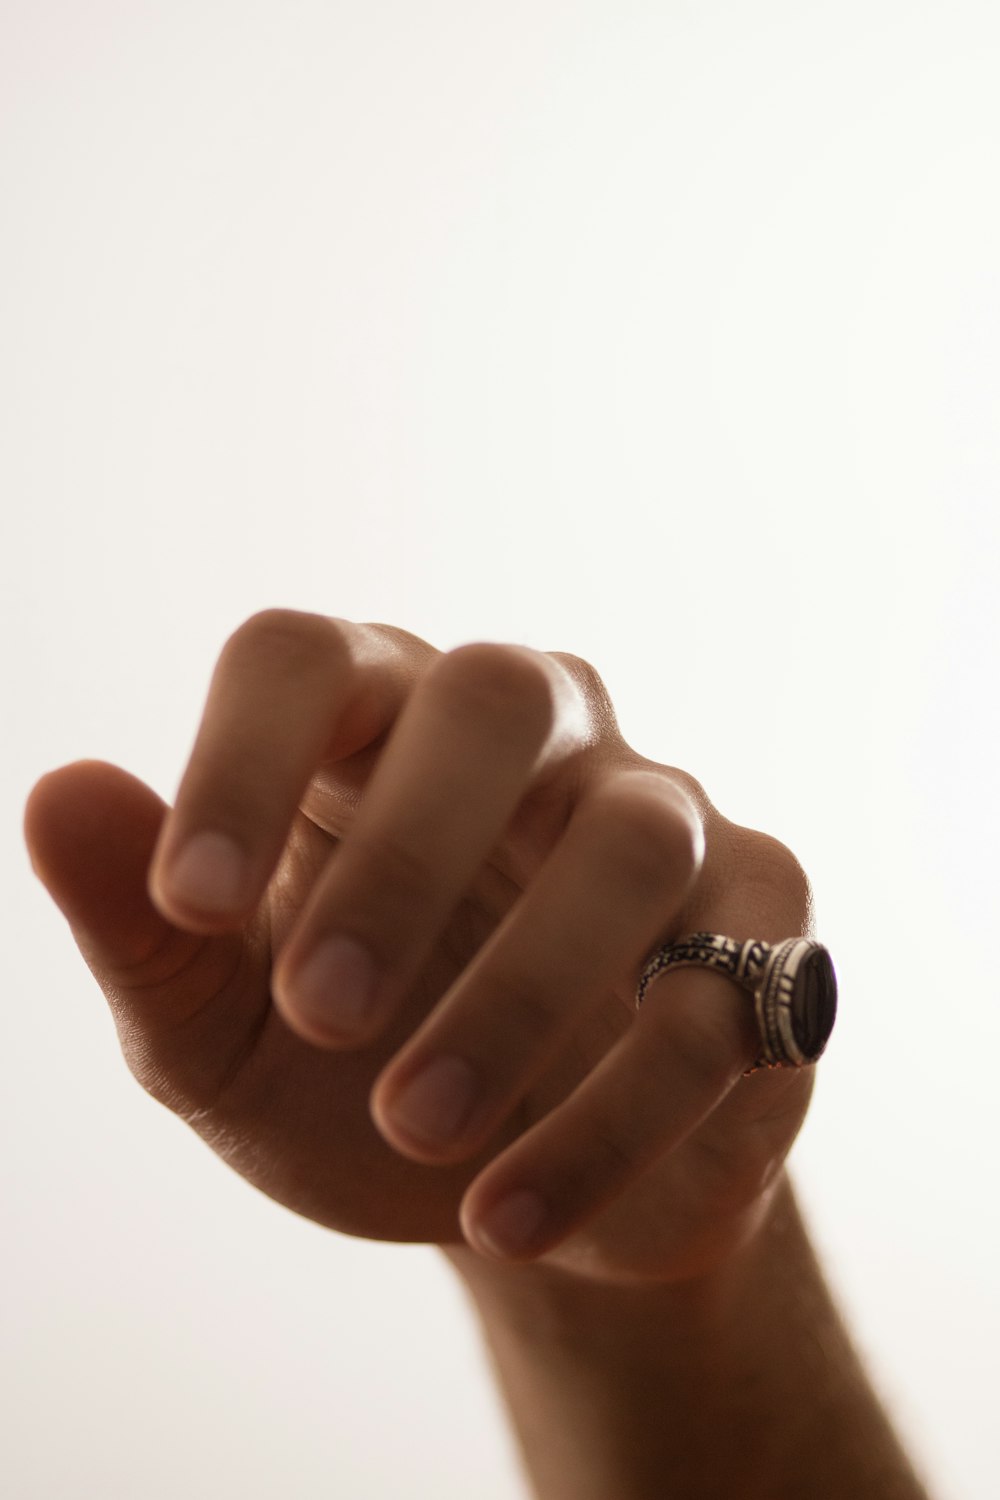 a hand with a ring on it holding something in the air